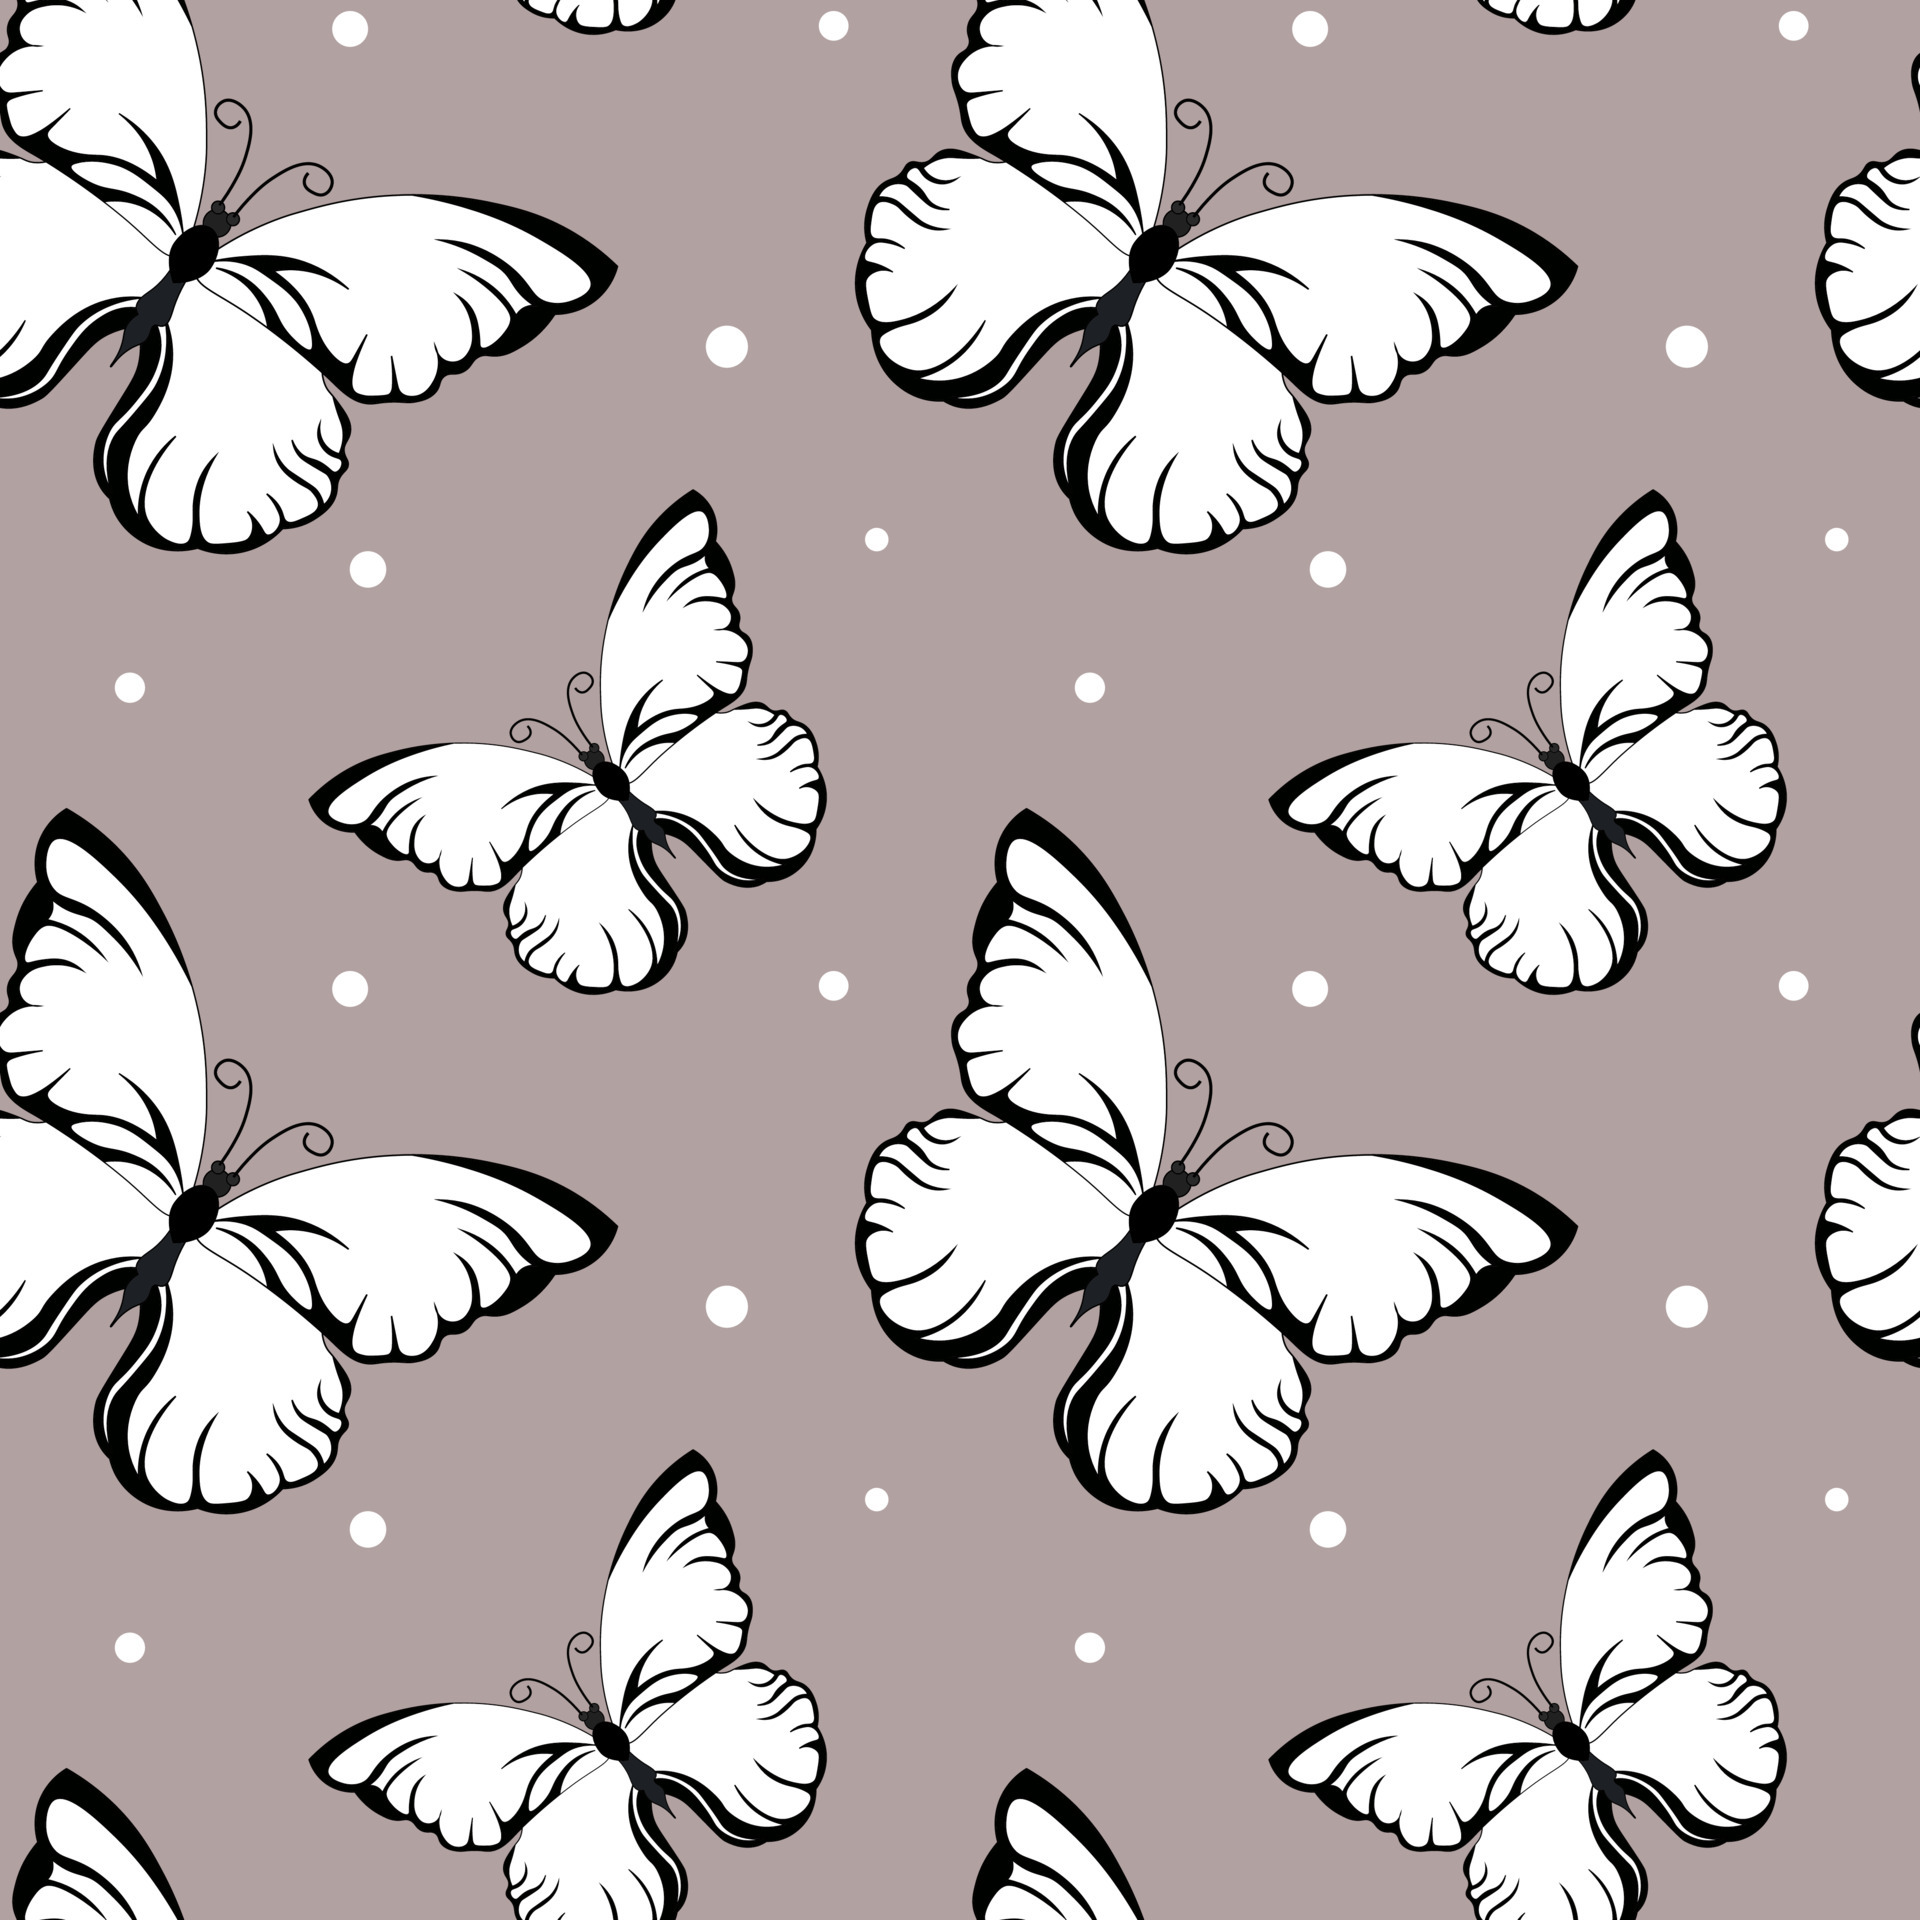 Seamless pattern, white butterflies with black ornaments on a beige background. Textile, wallpaper, print, bedroom decor